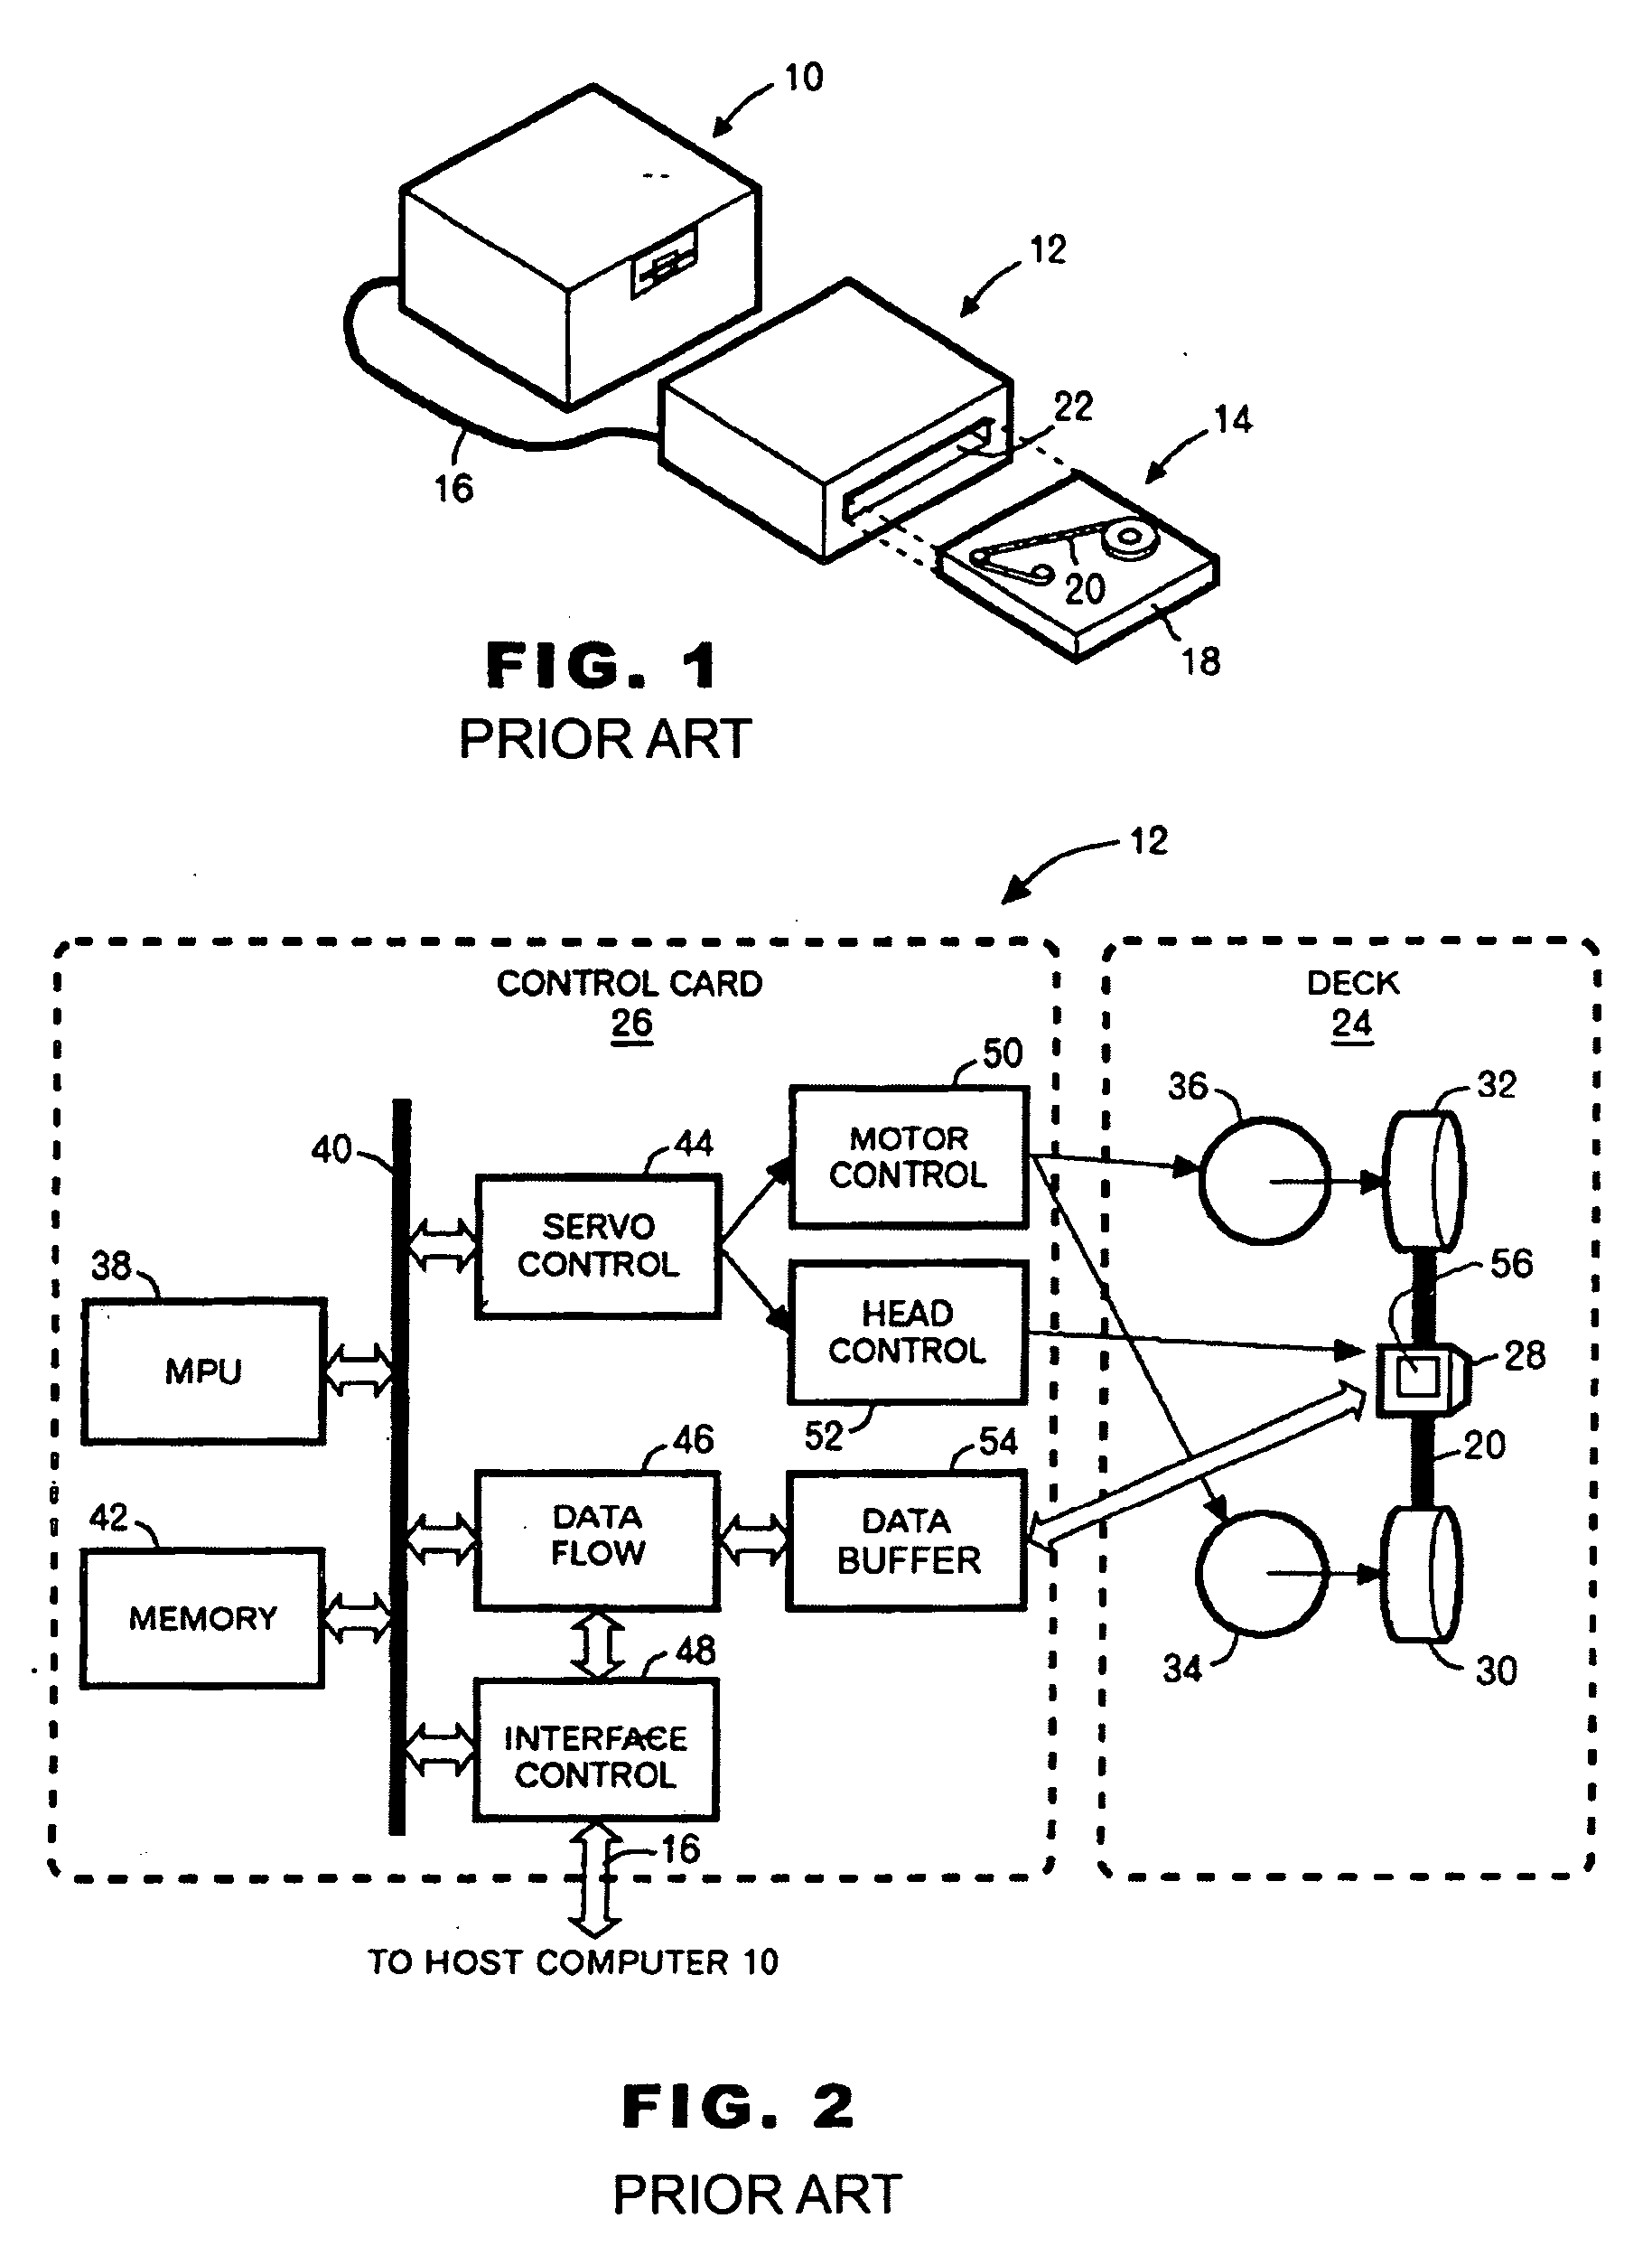 System and method for controlling the speed of a tape drive